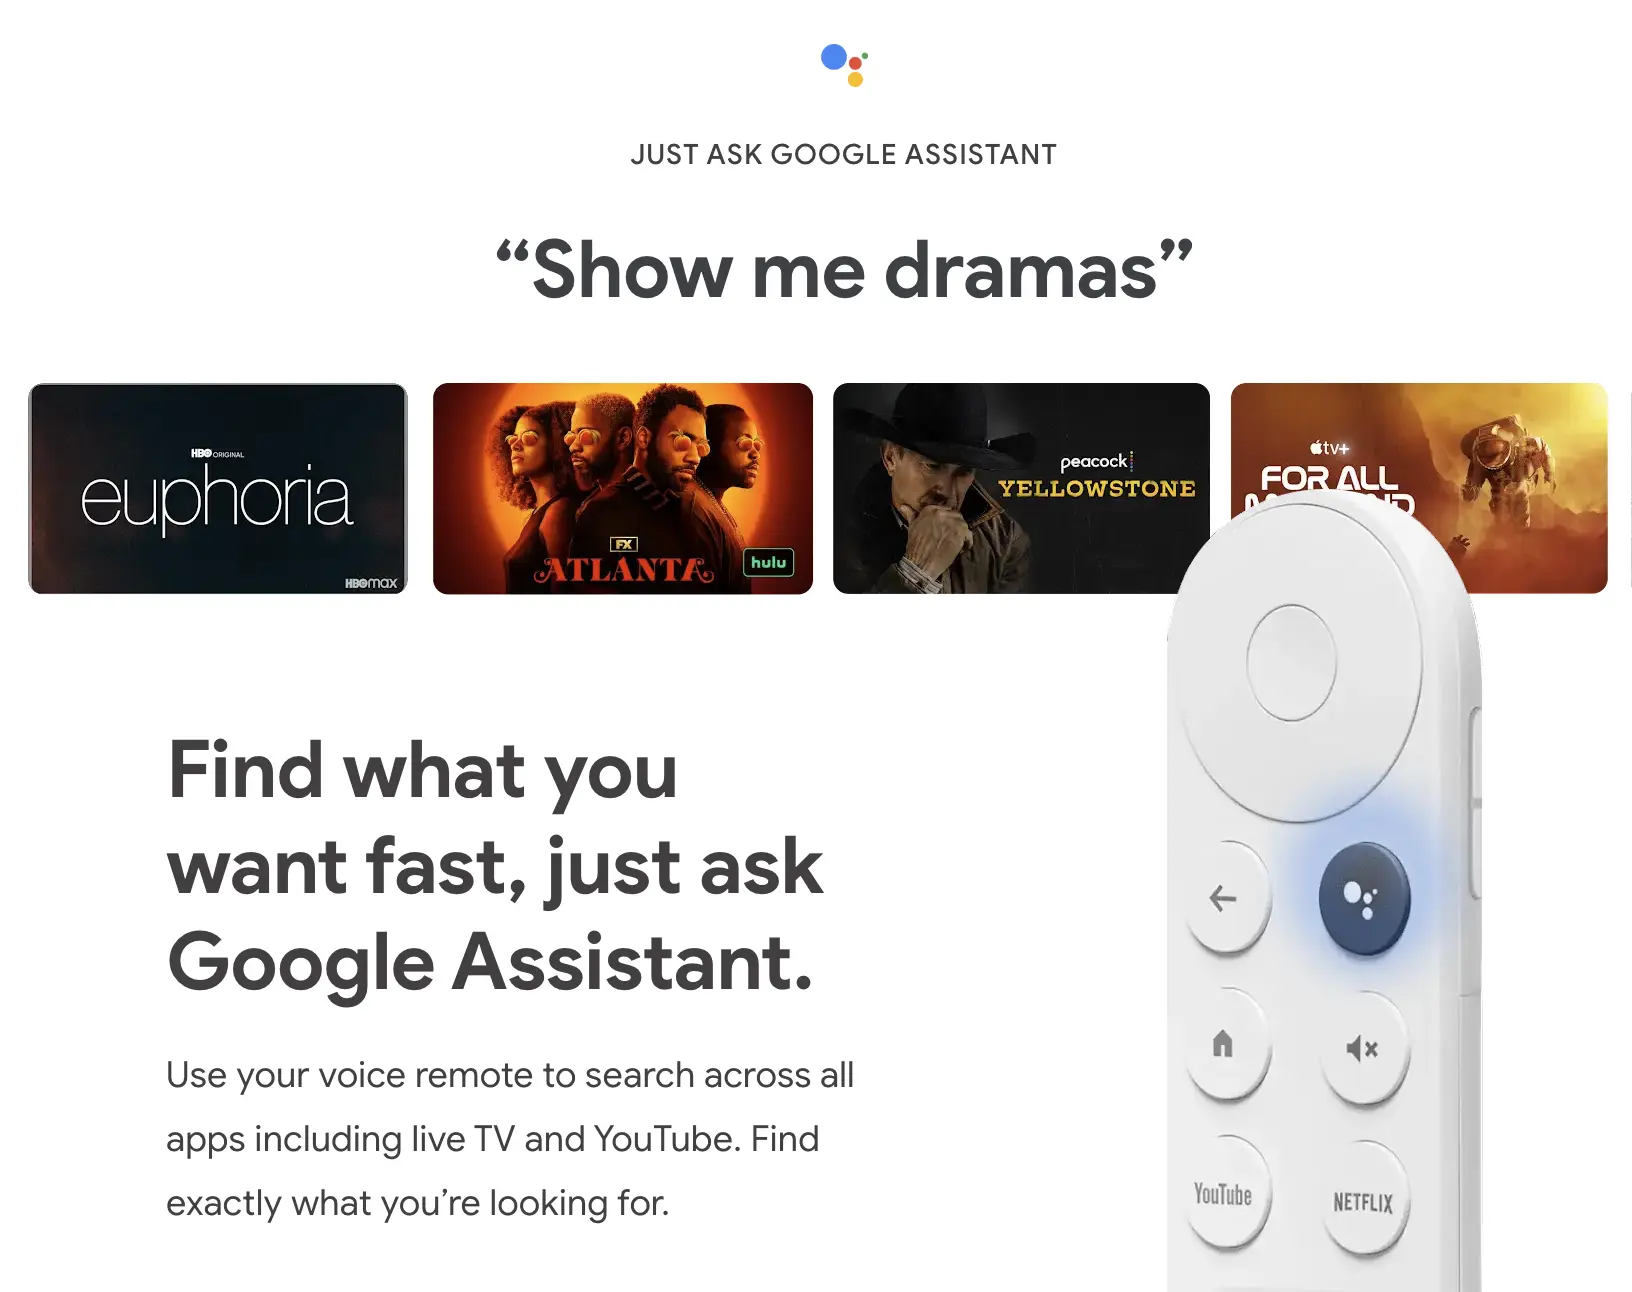 Promotional image of Assistant on Google TV